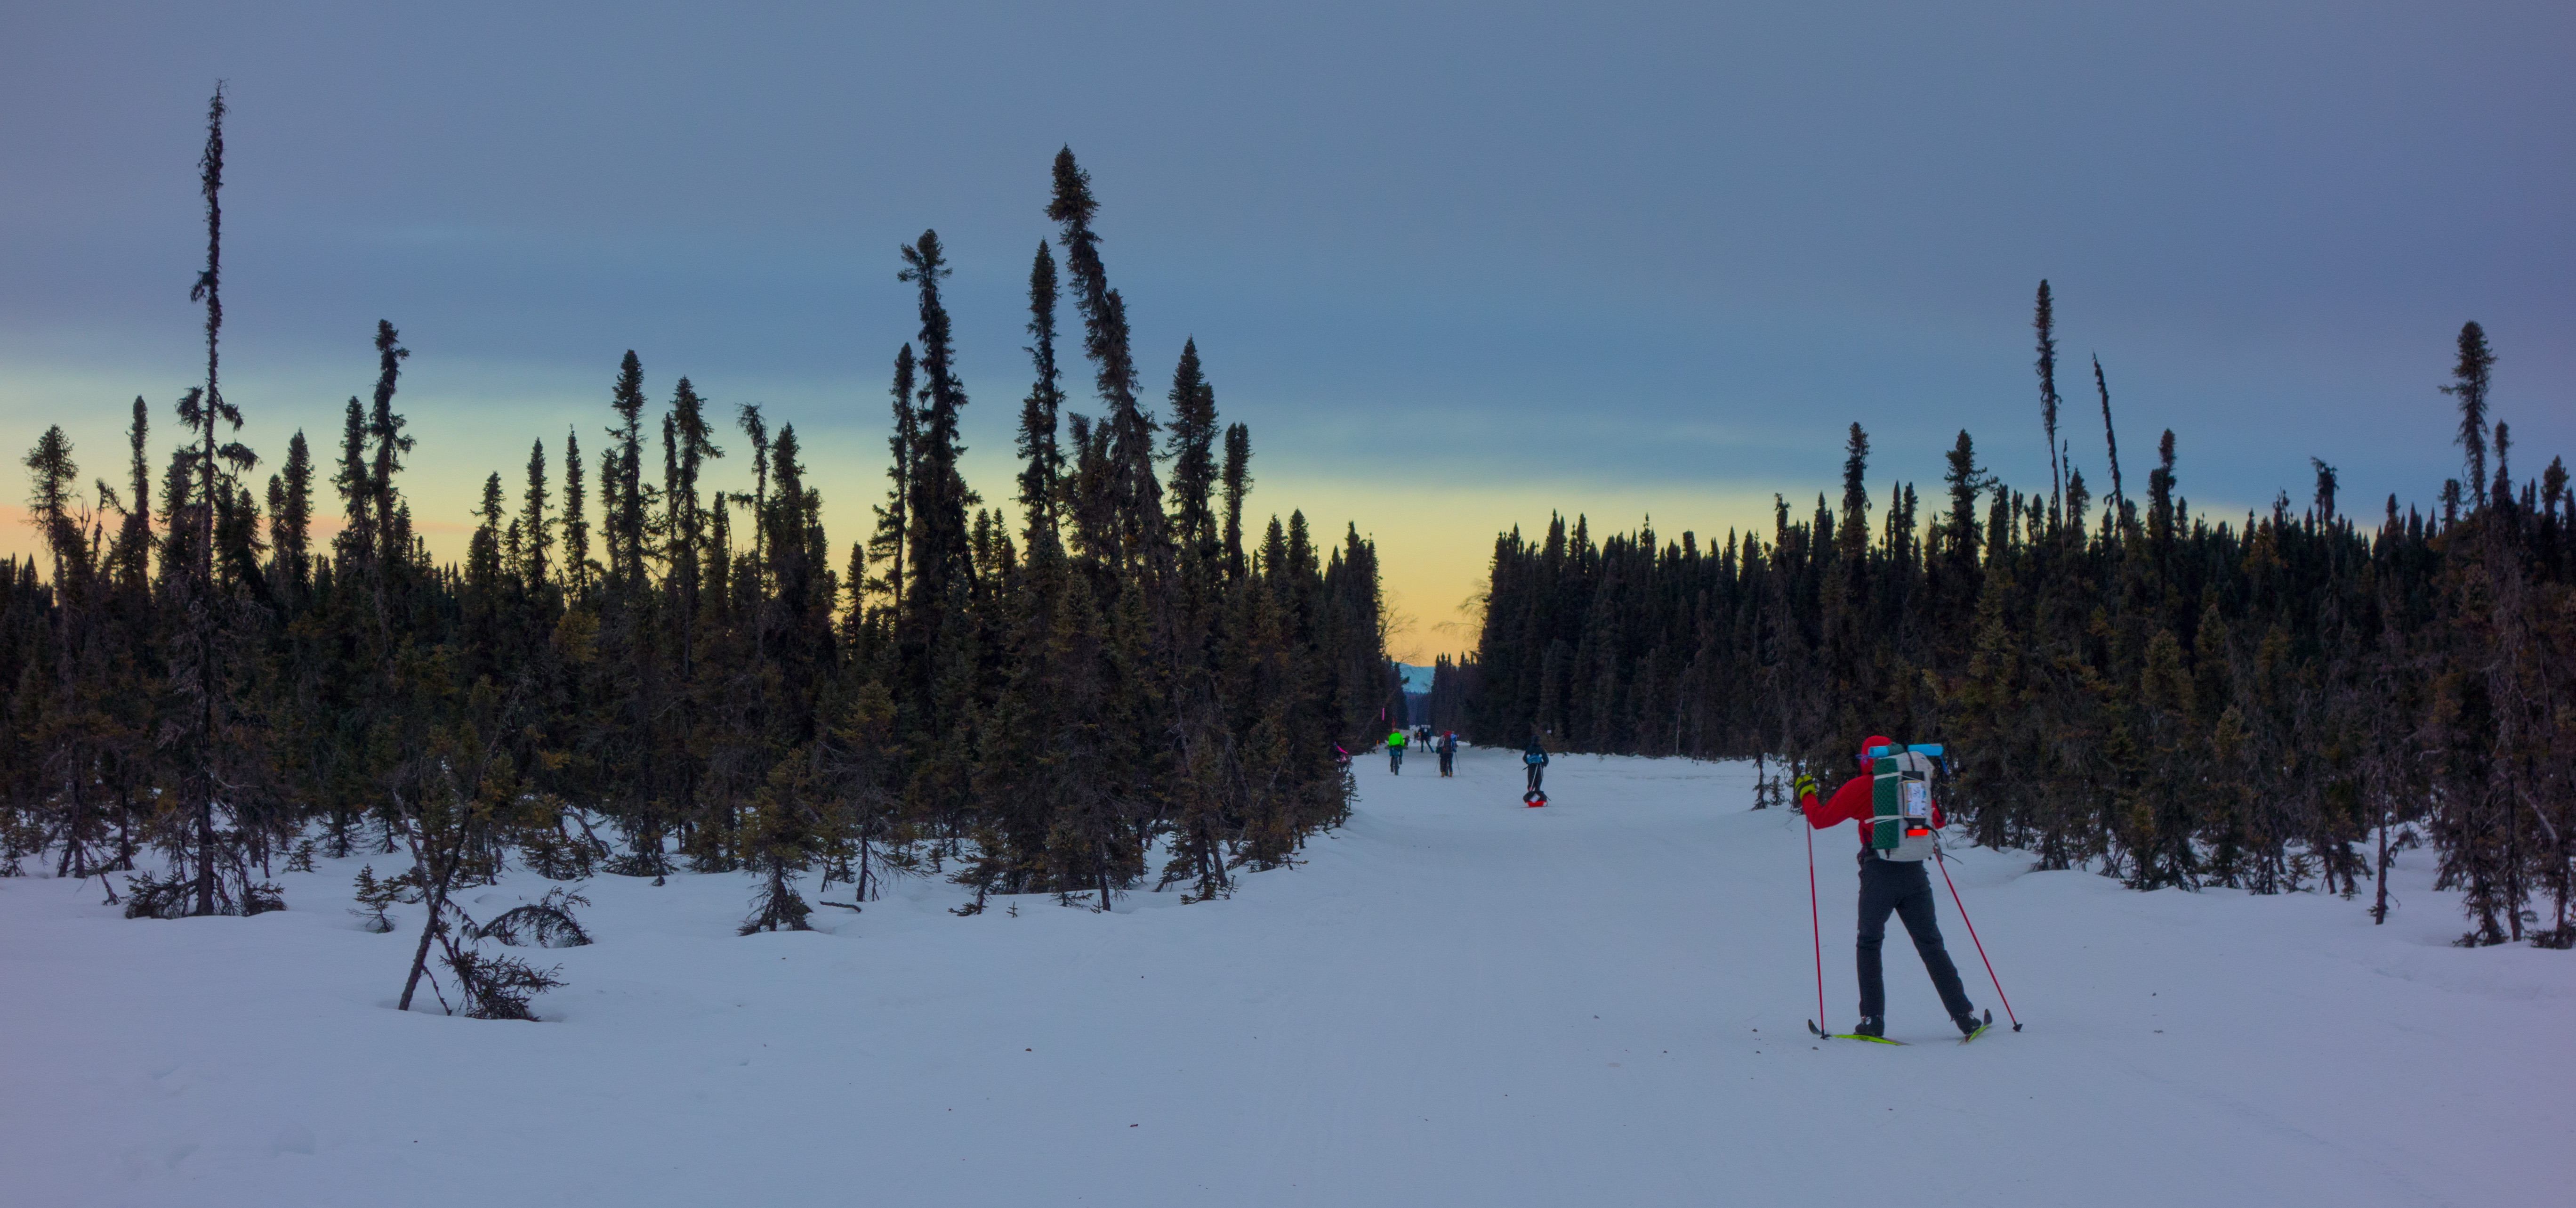 Trail skiing early in the Susitna 100. Photo: Seth Adams